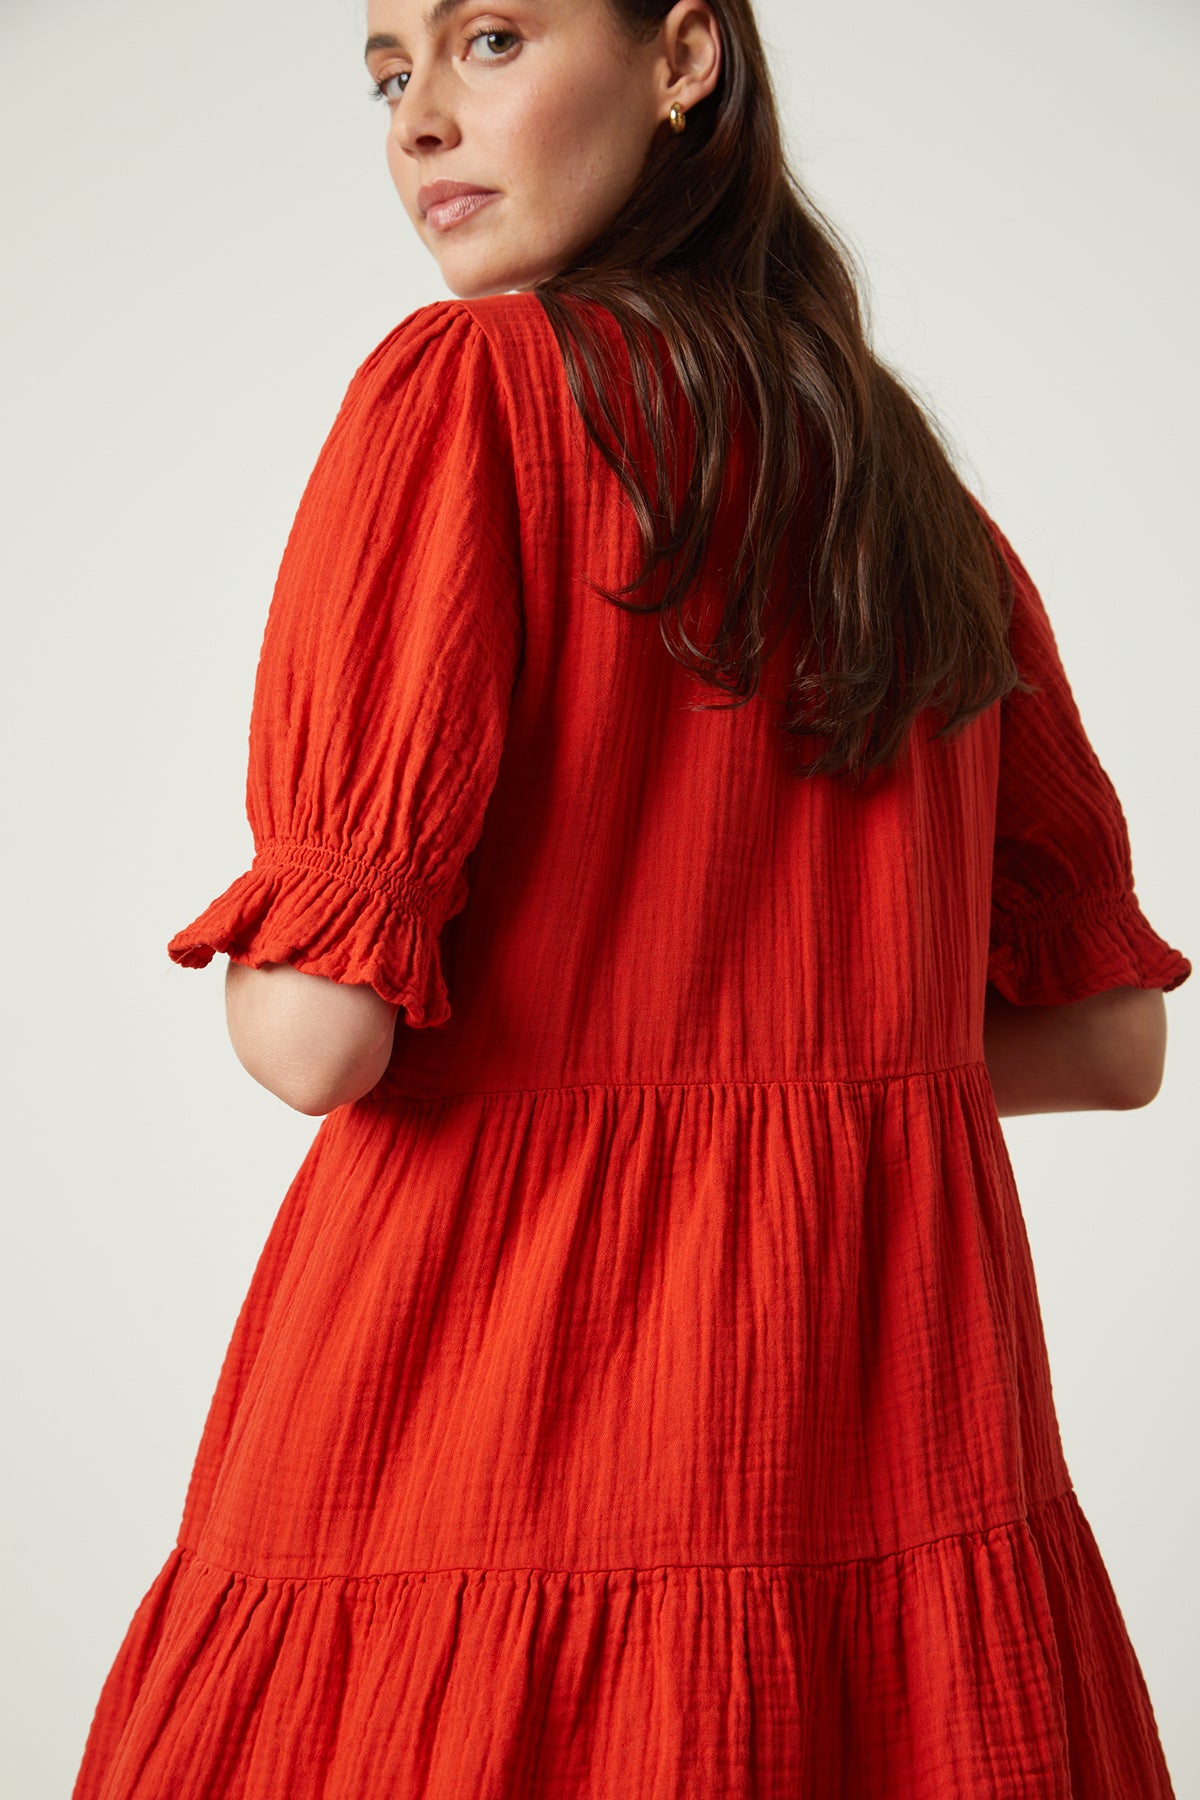   Clarissa dress in cherry red back close up detail 